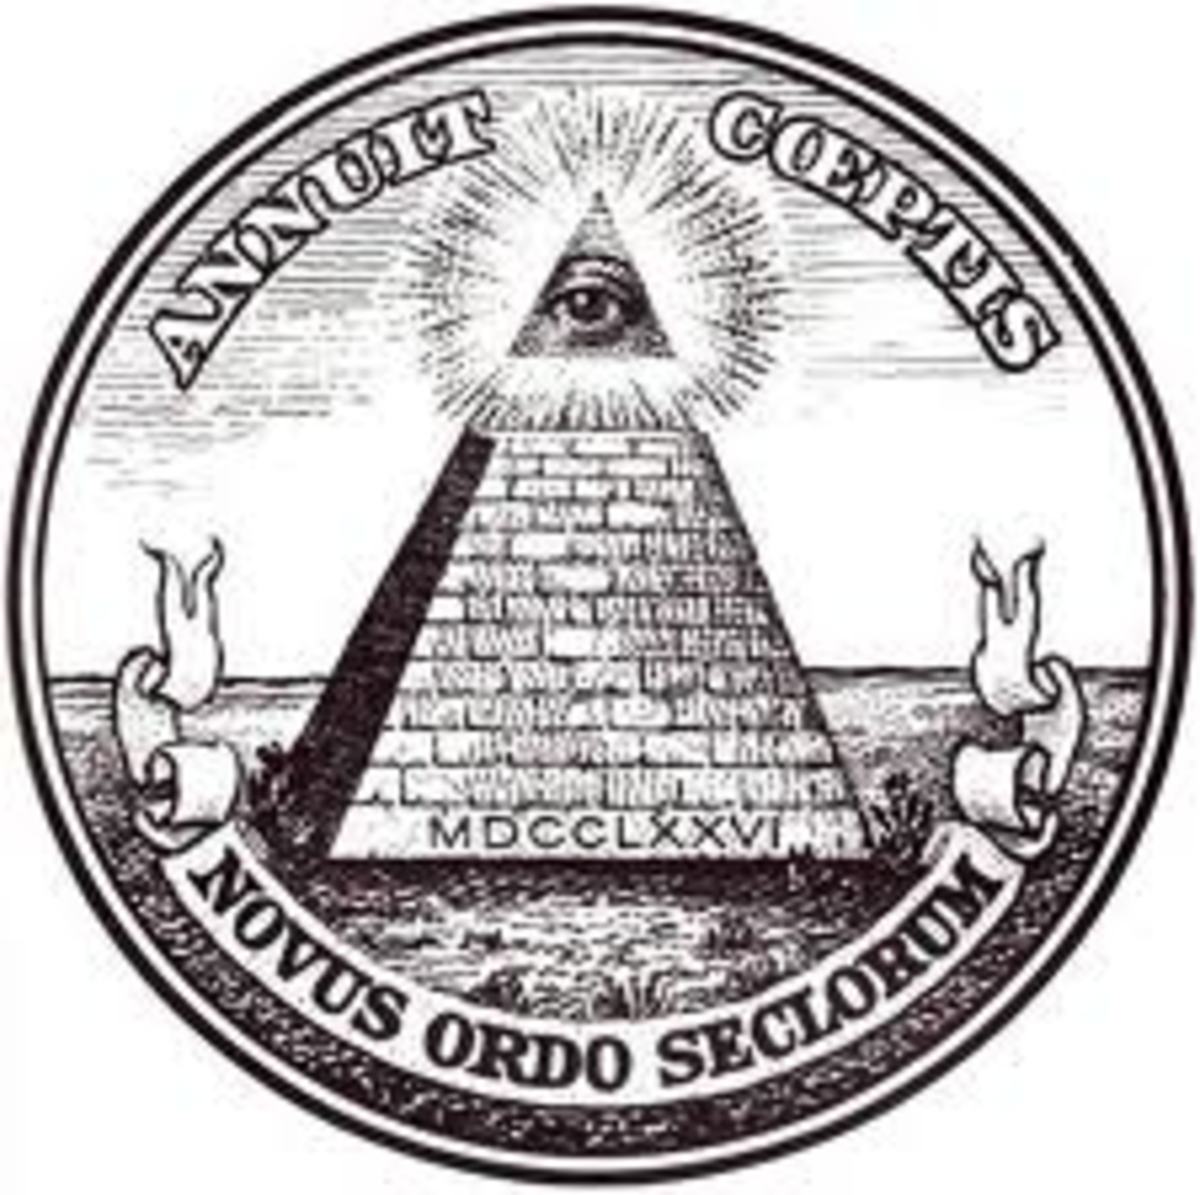 Franklin D. Roosevelt (FDR) The Great Seal And The Occult Novus Ordo Seclorum! How Secret Societies Control The People.